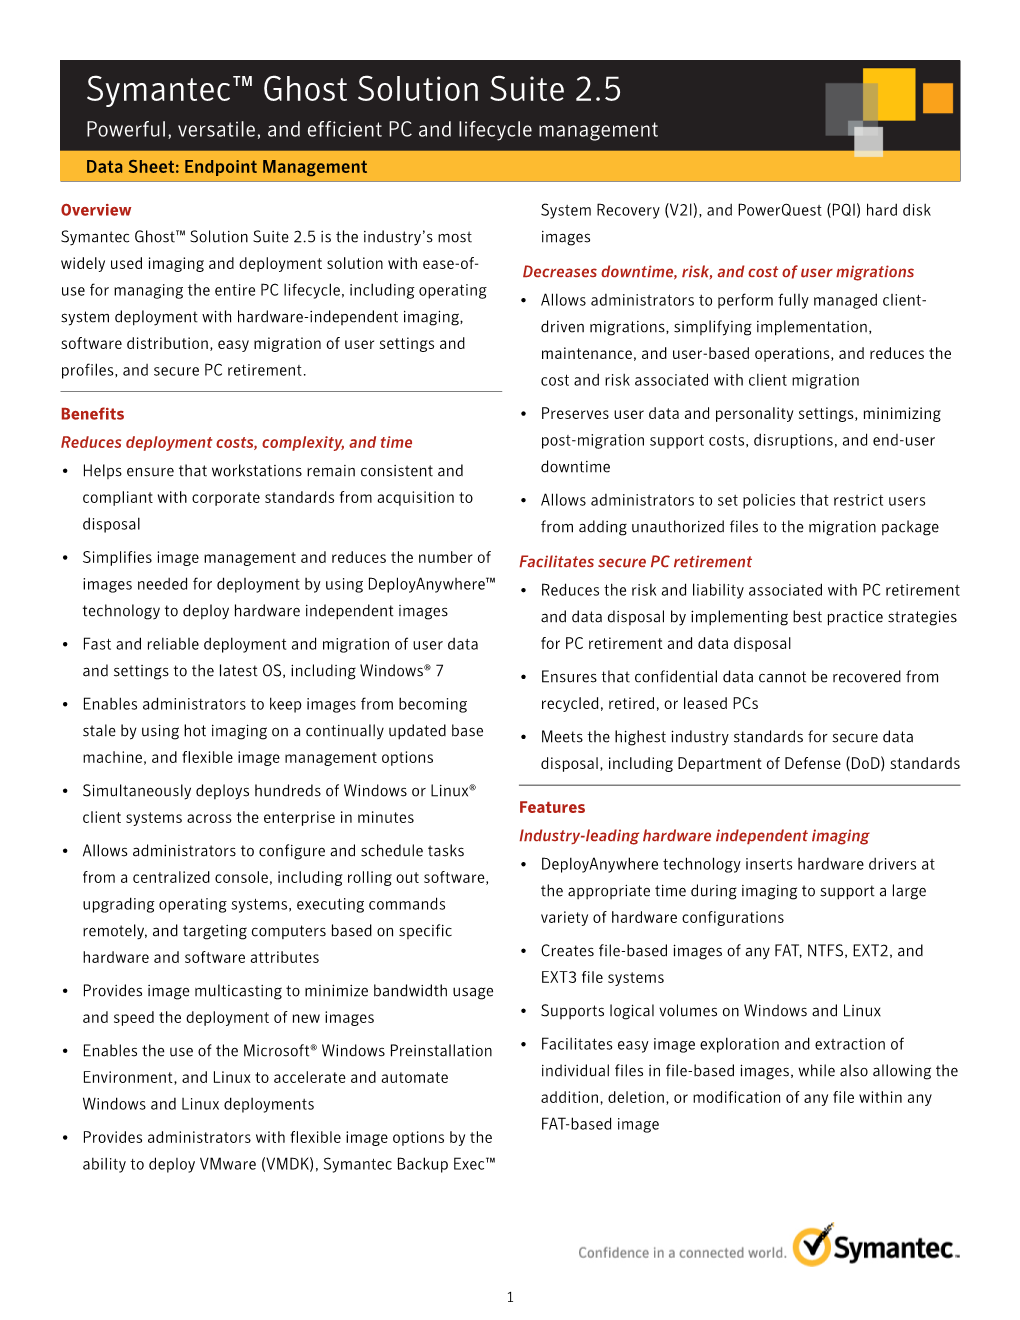 Symantec™ Ghost Solution Suite 2.5 Powerful, Versatile, and Efficient PC and Lifecycle Management Data Sheet: Endpoint Management